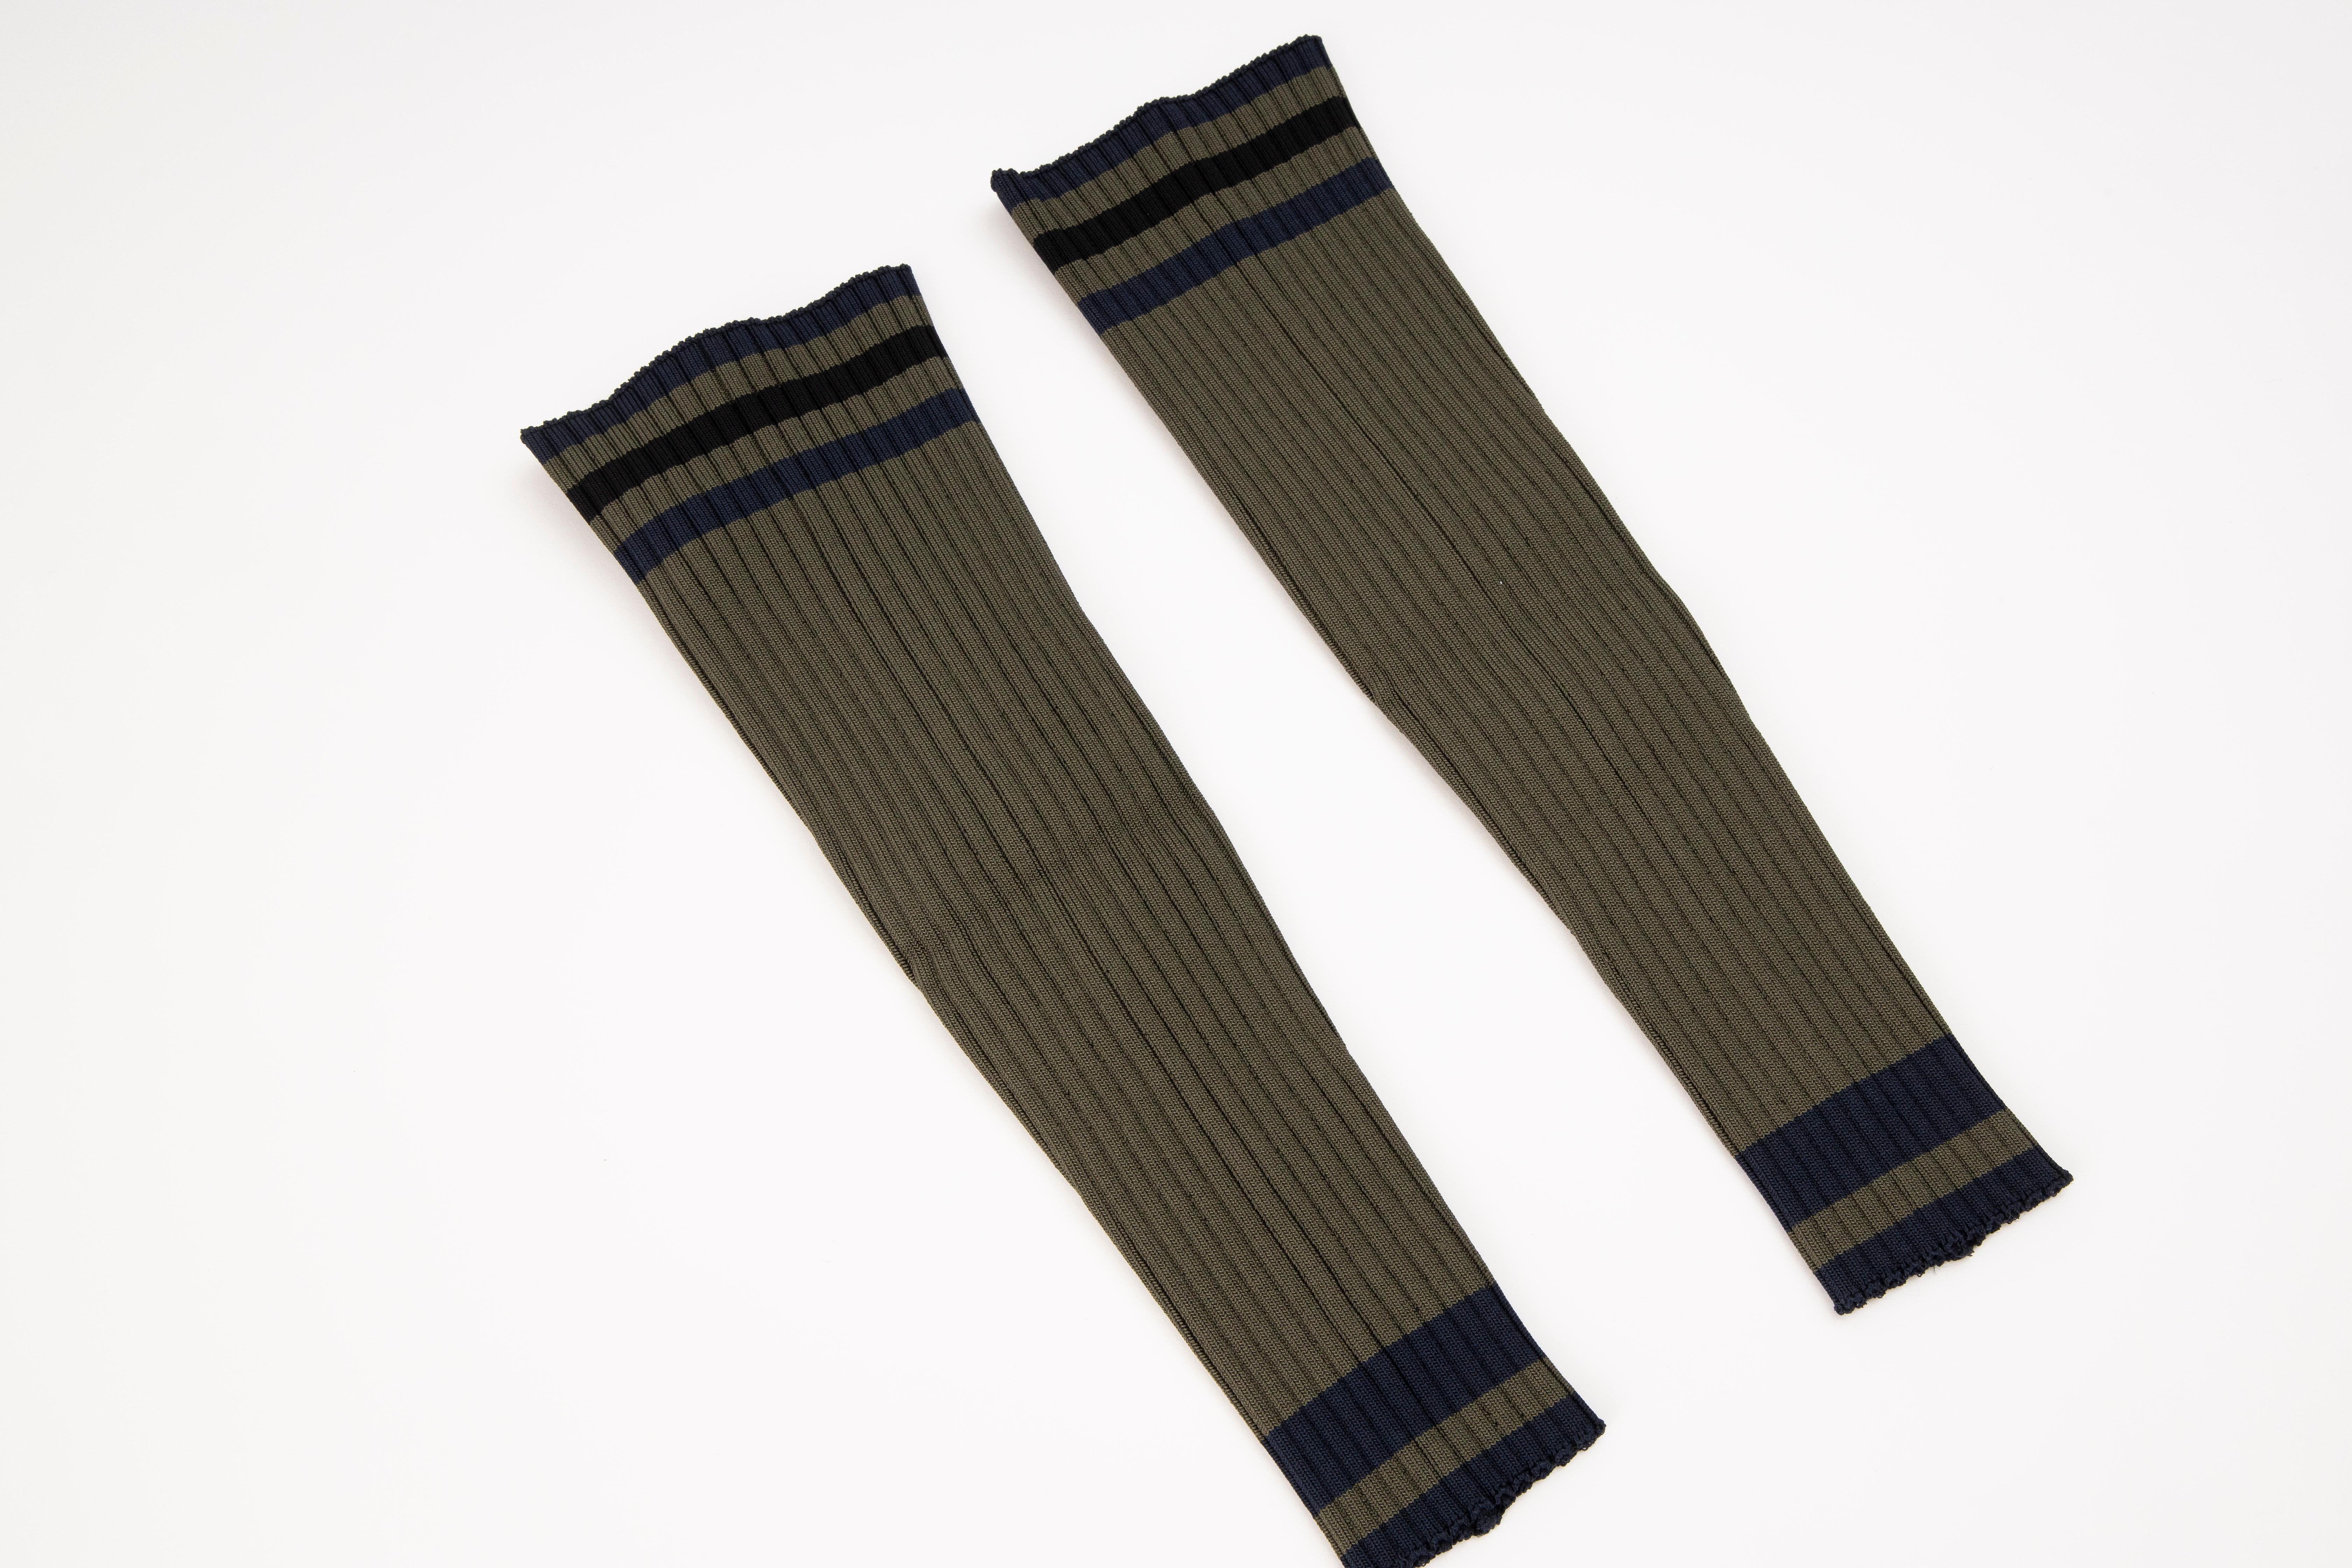 Prada, Spring 2014 runway olive green, navy blue and black striped viscose leg warmers with Prada packaging and tags.

Length: 14.25